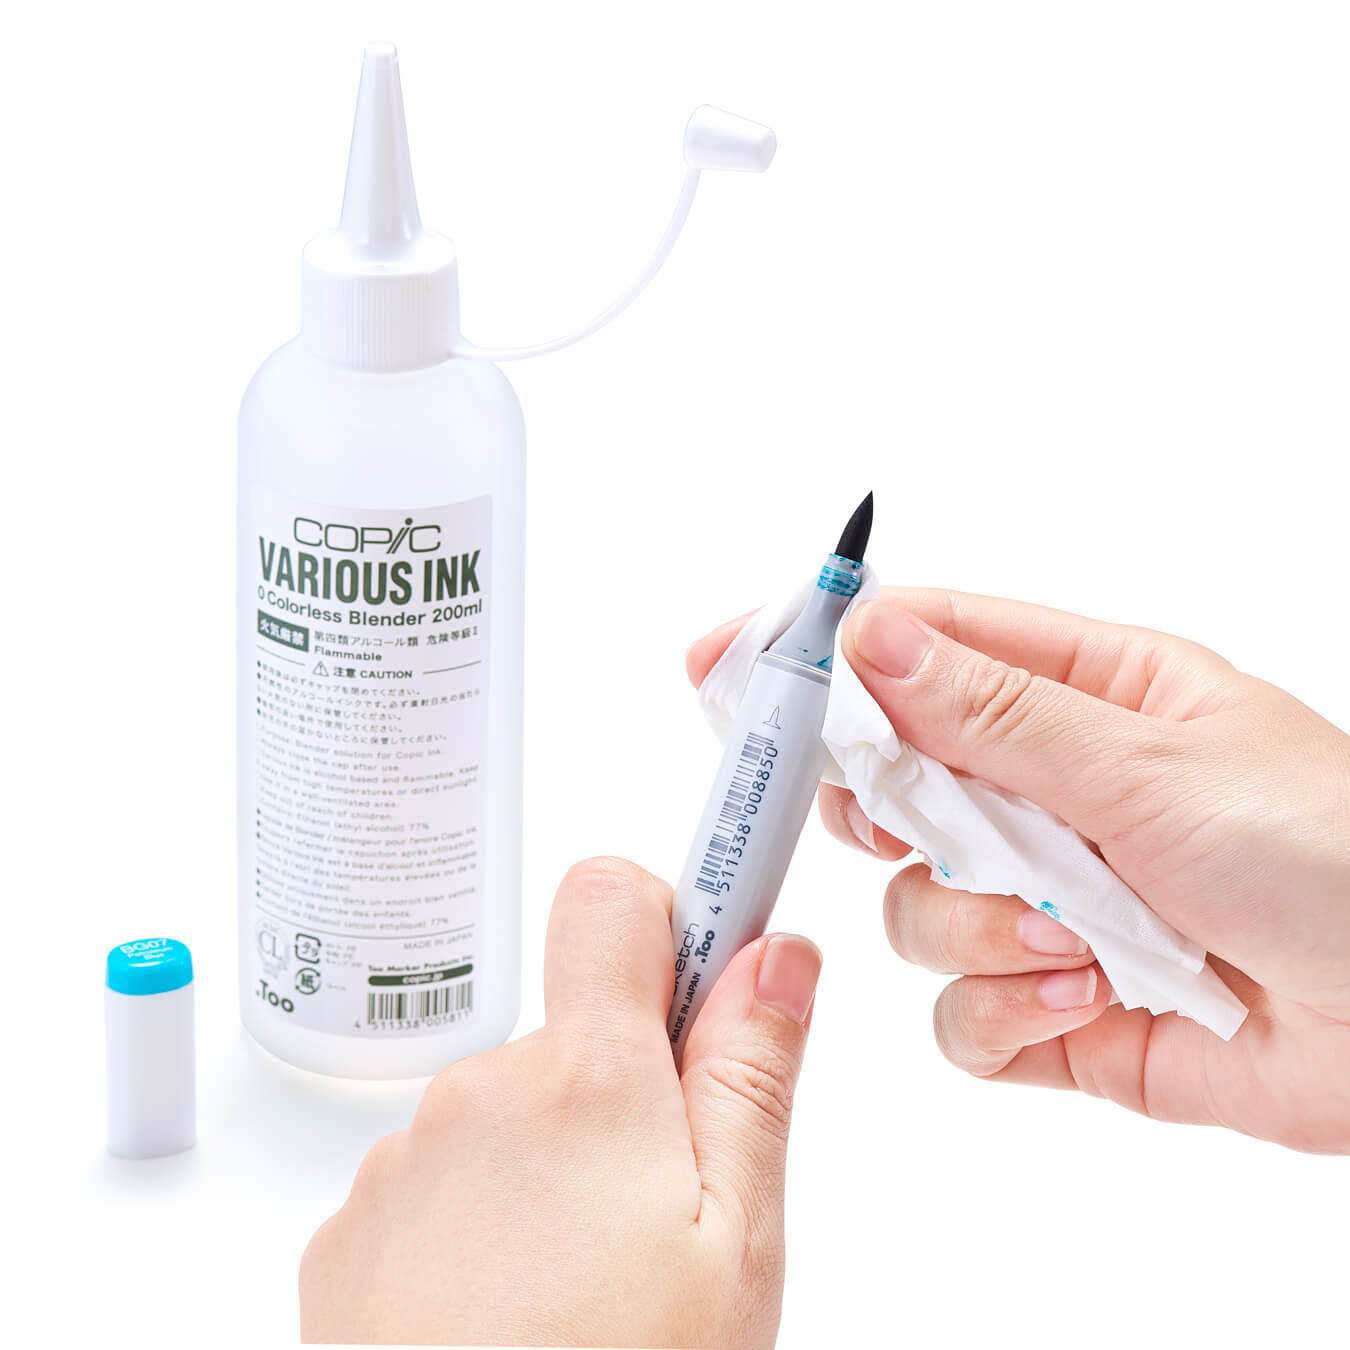 Colorless Blender 0ml Refill Copic Official Website